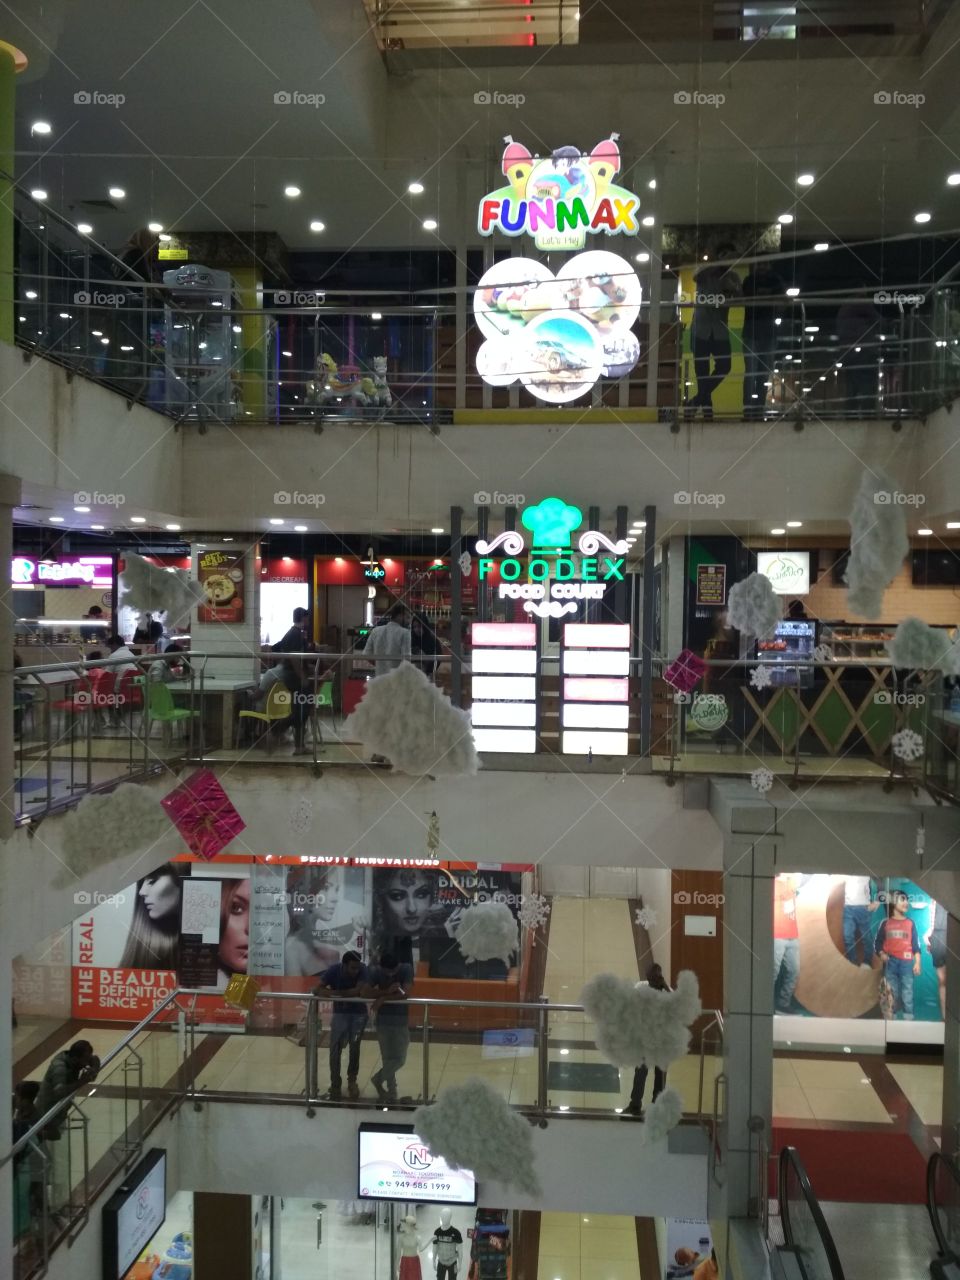 Mall inside view